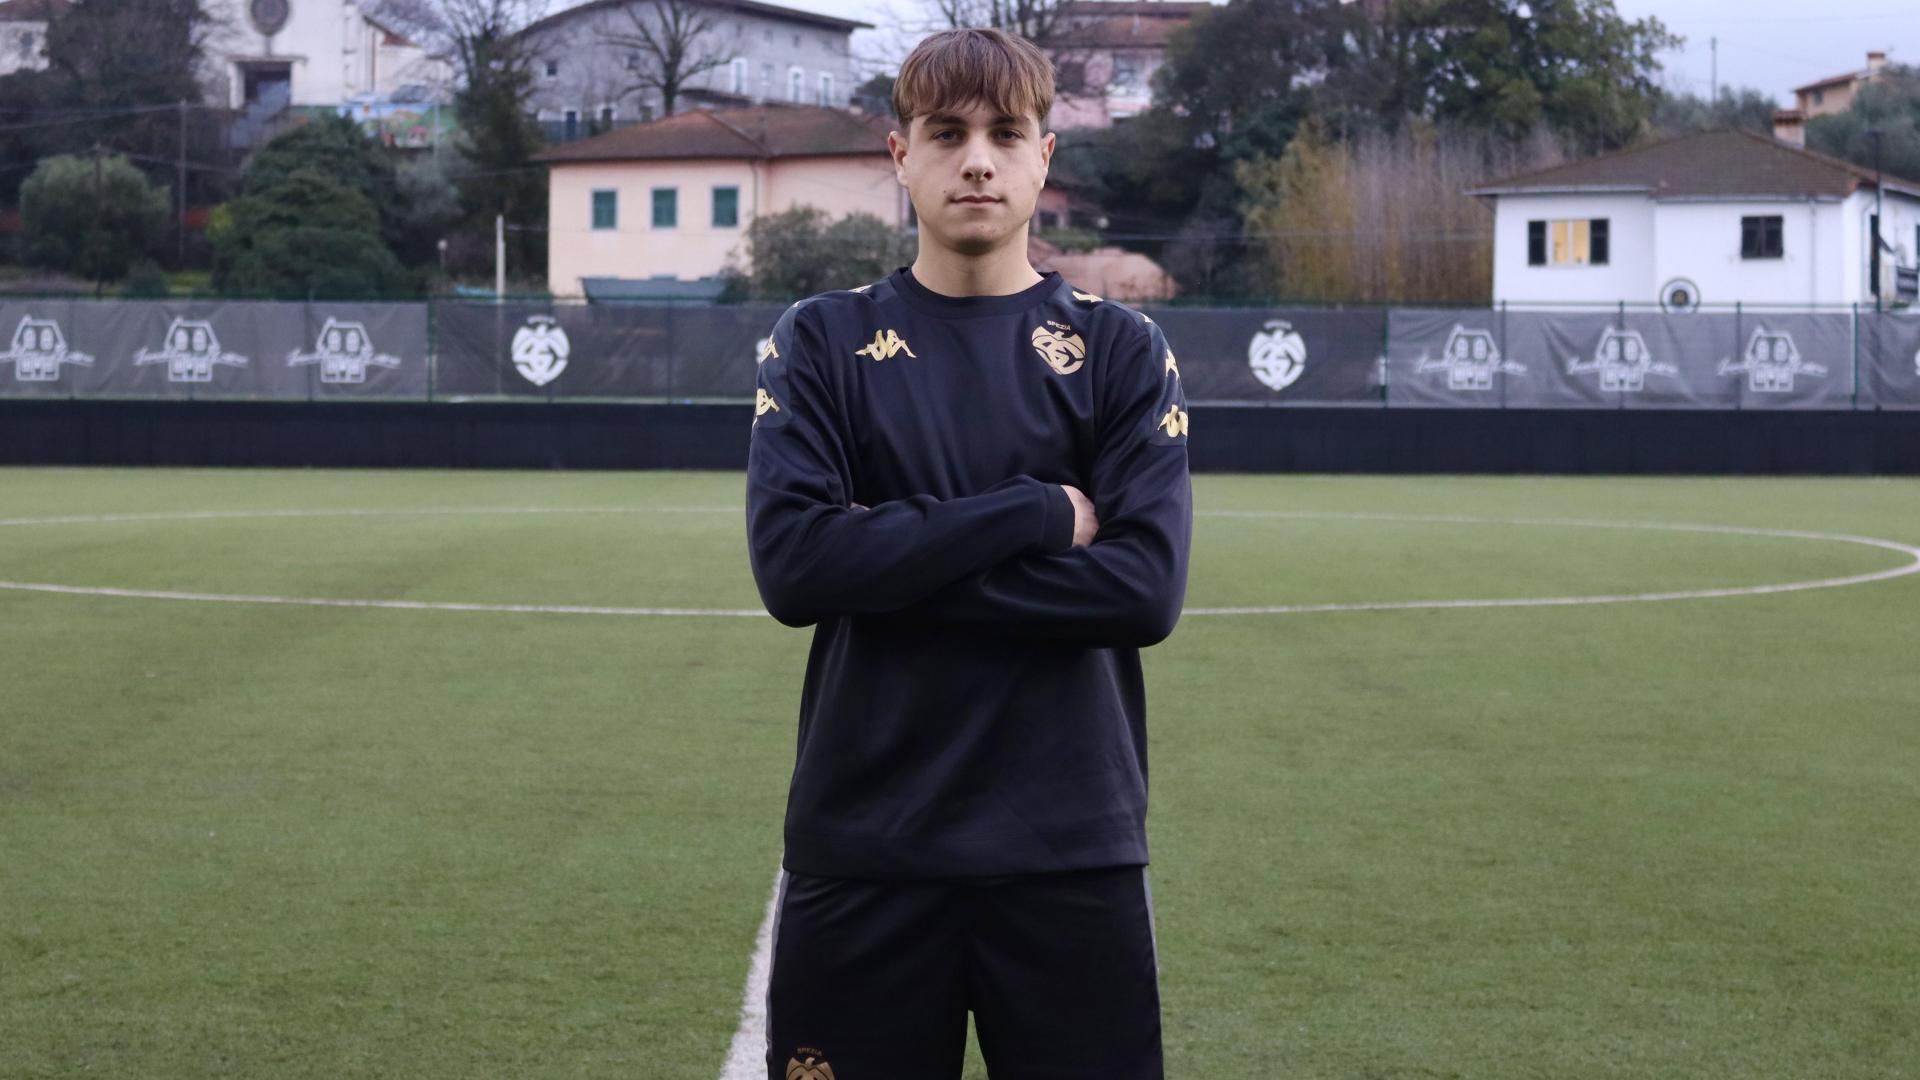 Call-up to the Under 16 national team for Alessio Insignito